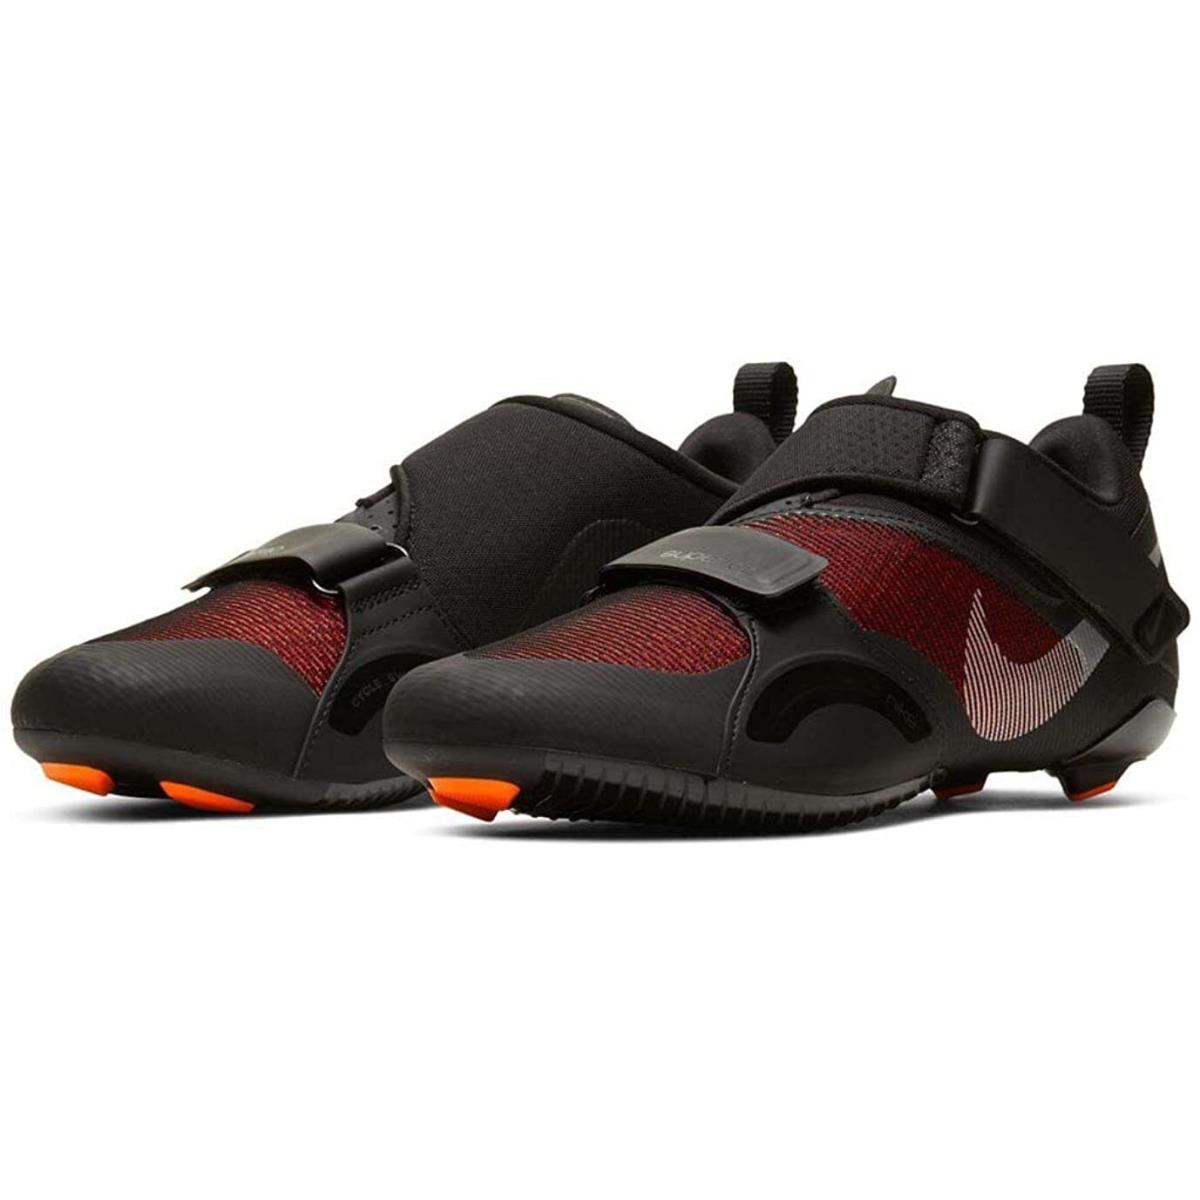 Nike Superrep Cycle Black Crimson Red Indoor Cycling Shoes Men`s Sizes 8-13